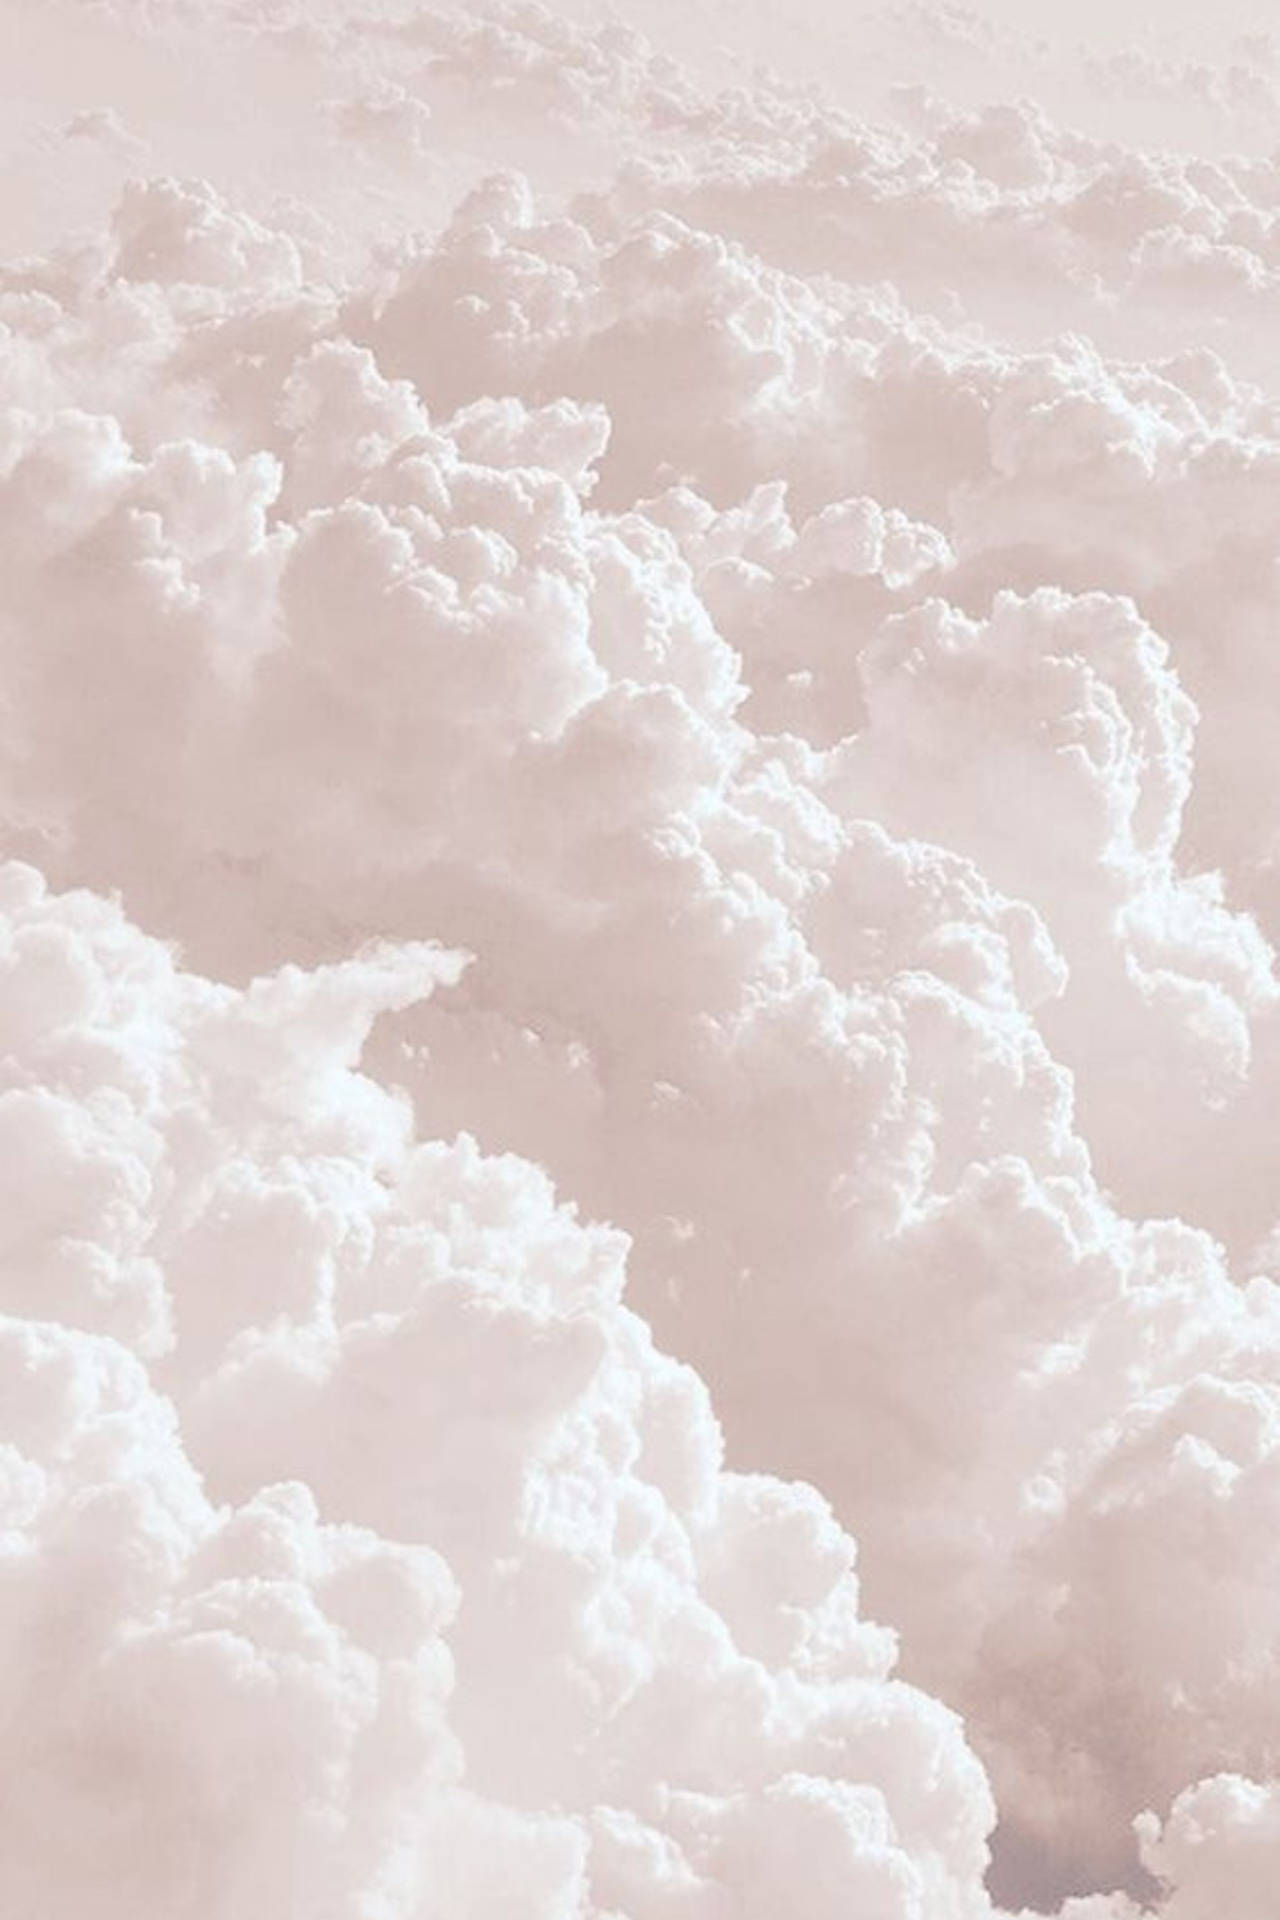 Aesthetic Clouds iPhone Wallpaper with high-resolution 1080x1920 pixel. You can use this wallpaper for your iPhone 5, 6, 7, 8, X, XS, XR backgrounds, Mobile Screensaver, or iPad Lock Screen - Cloud